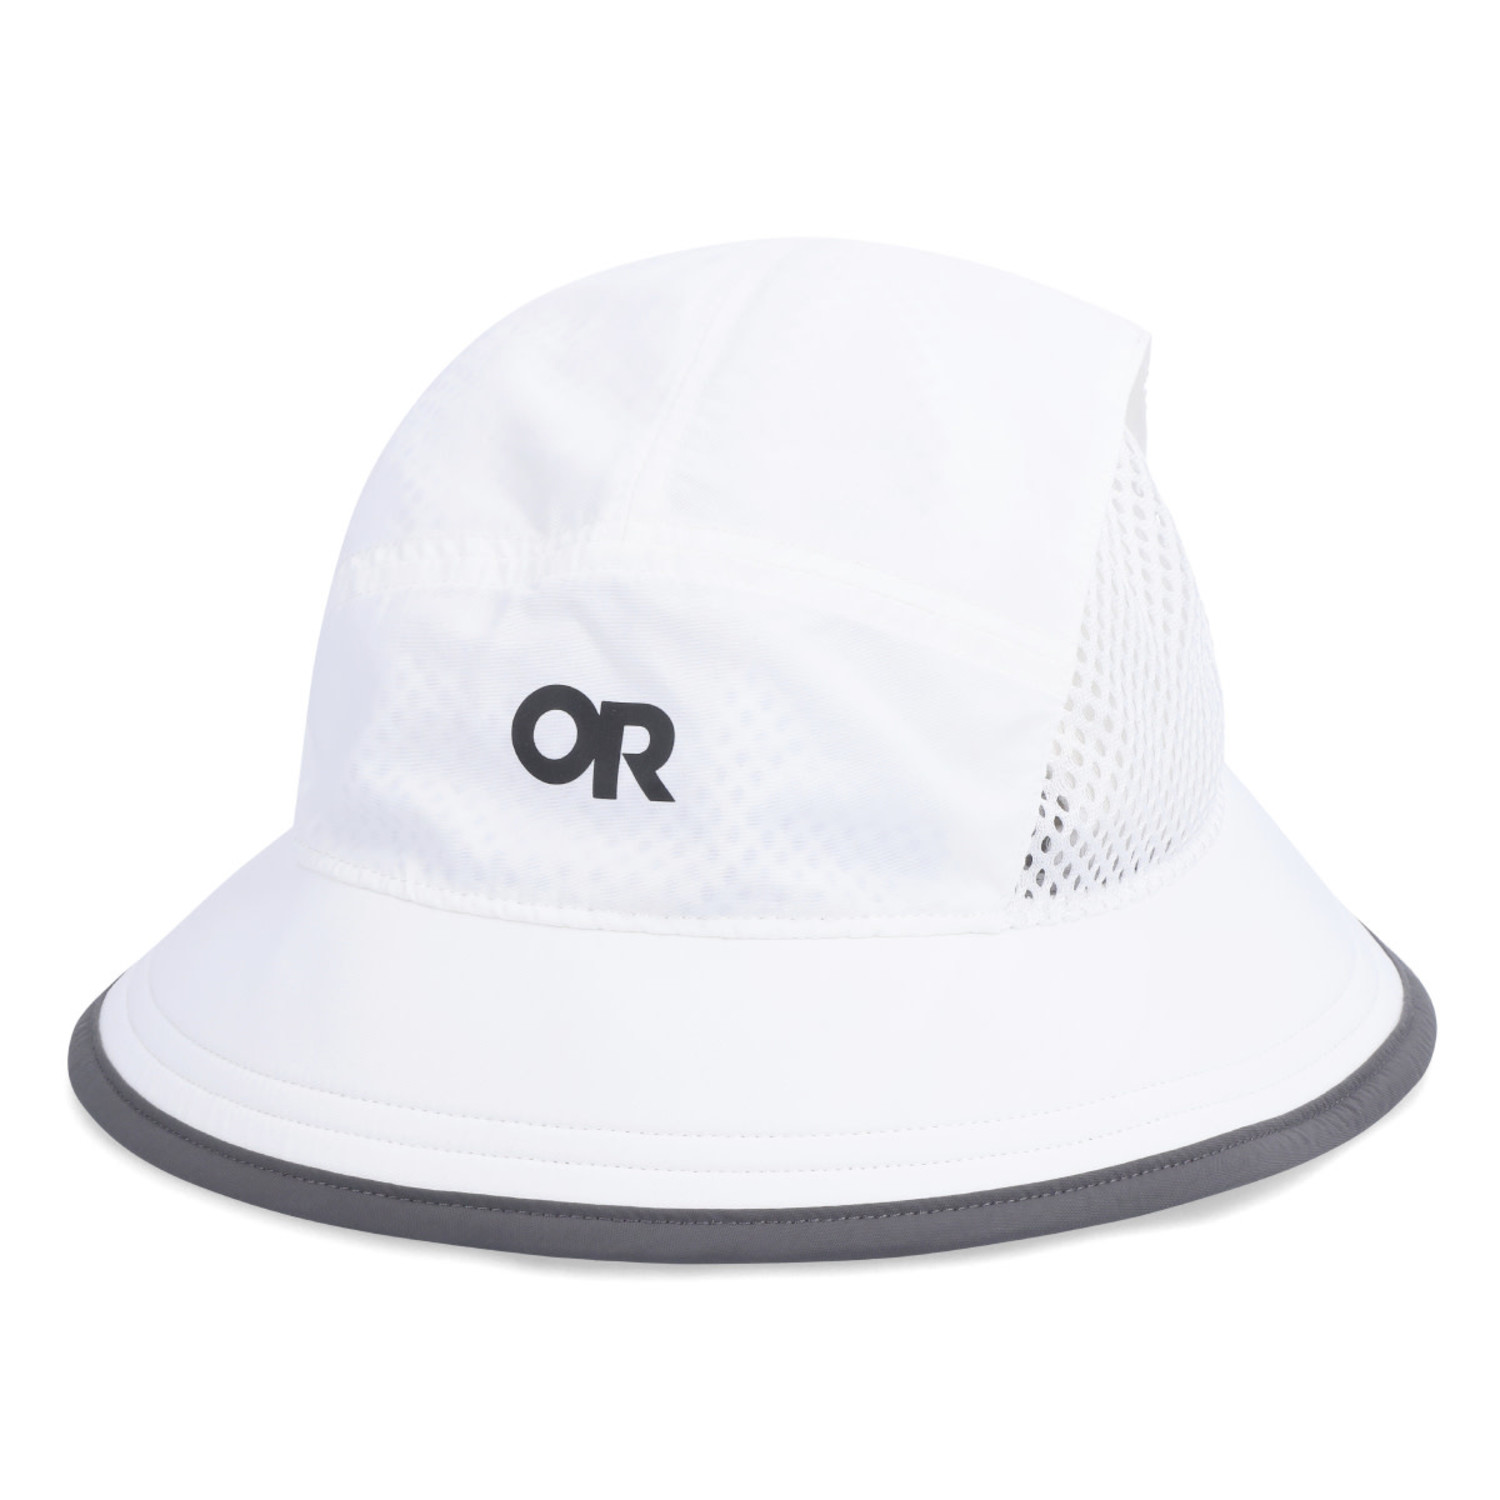 Sun Proof Fitted Baseball Cap For Outdoor Sports: Stylish Bucket Hat For  Men And Women From Jursn968, $36.29